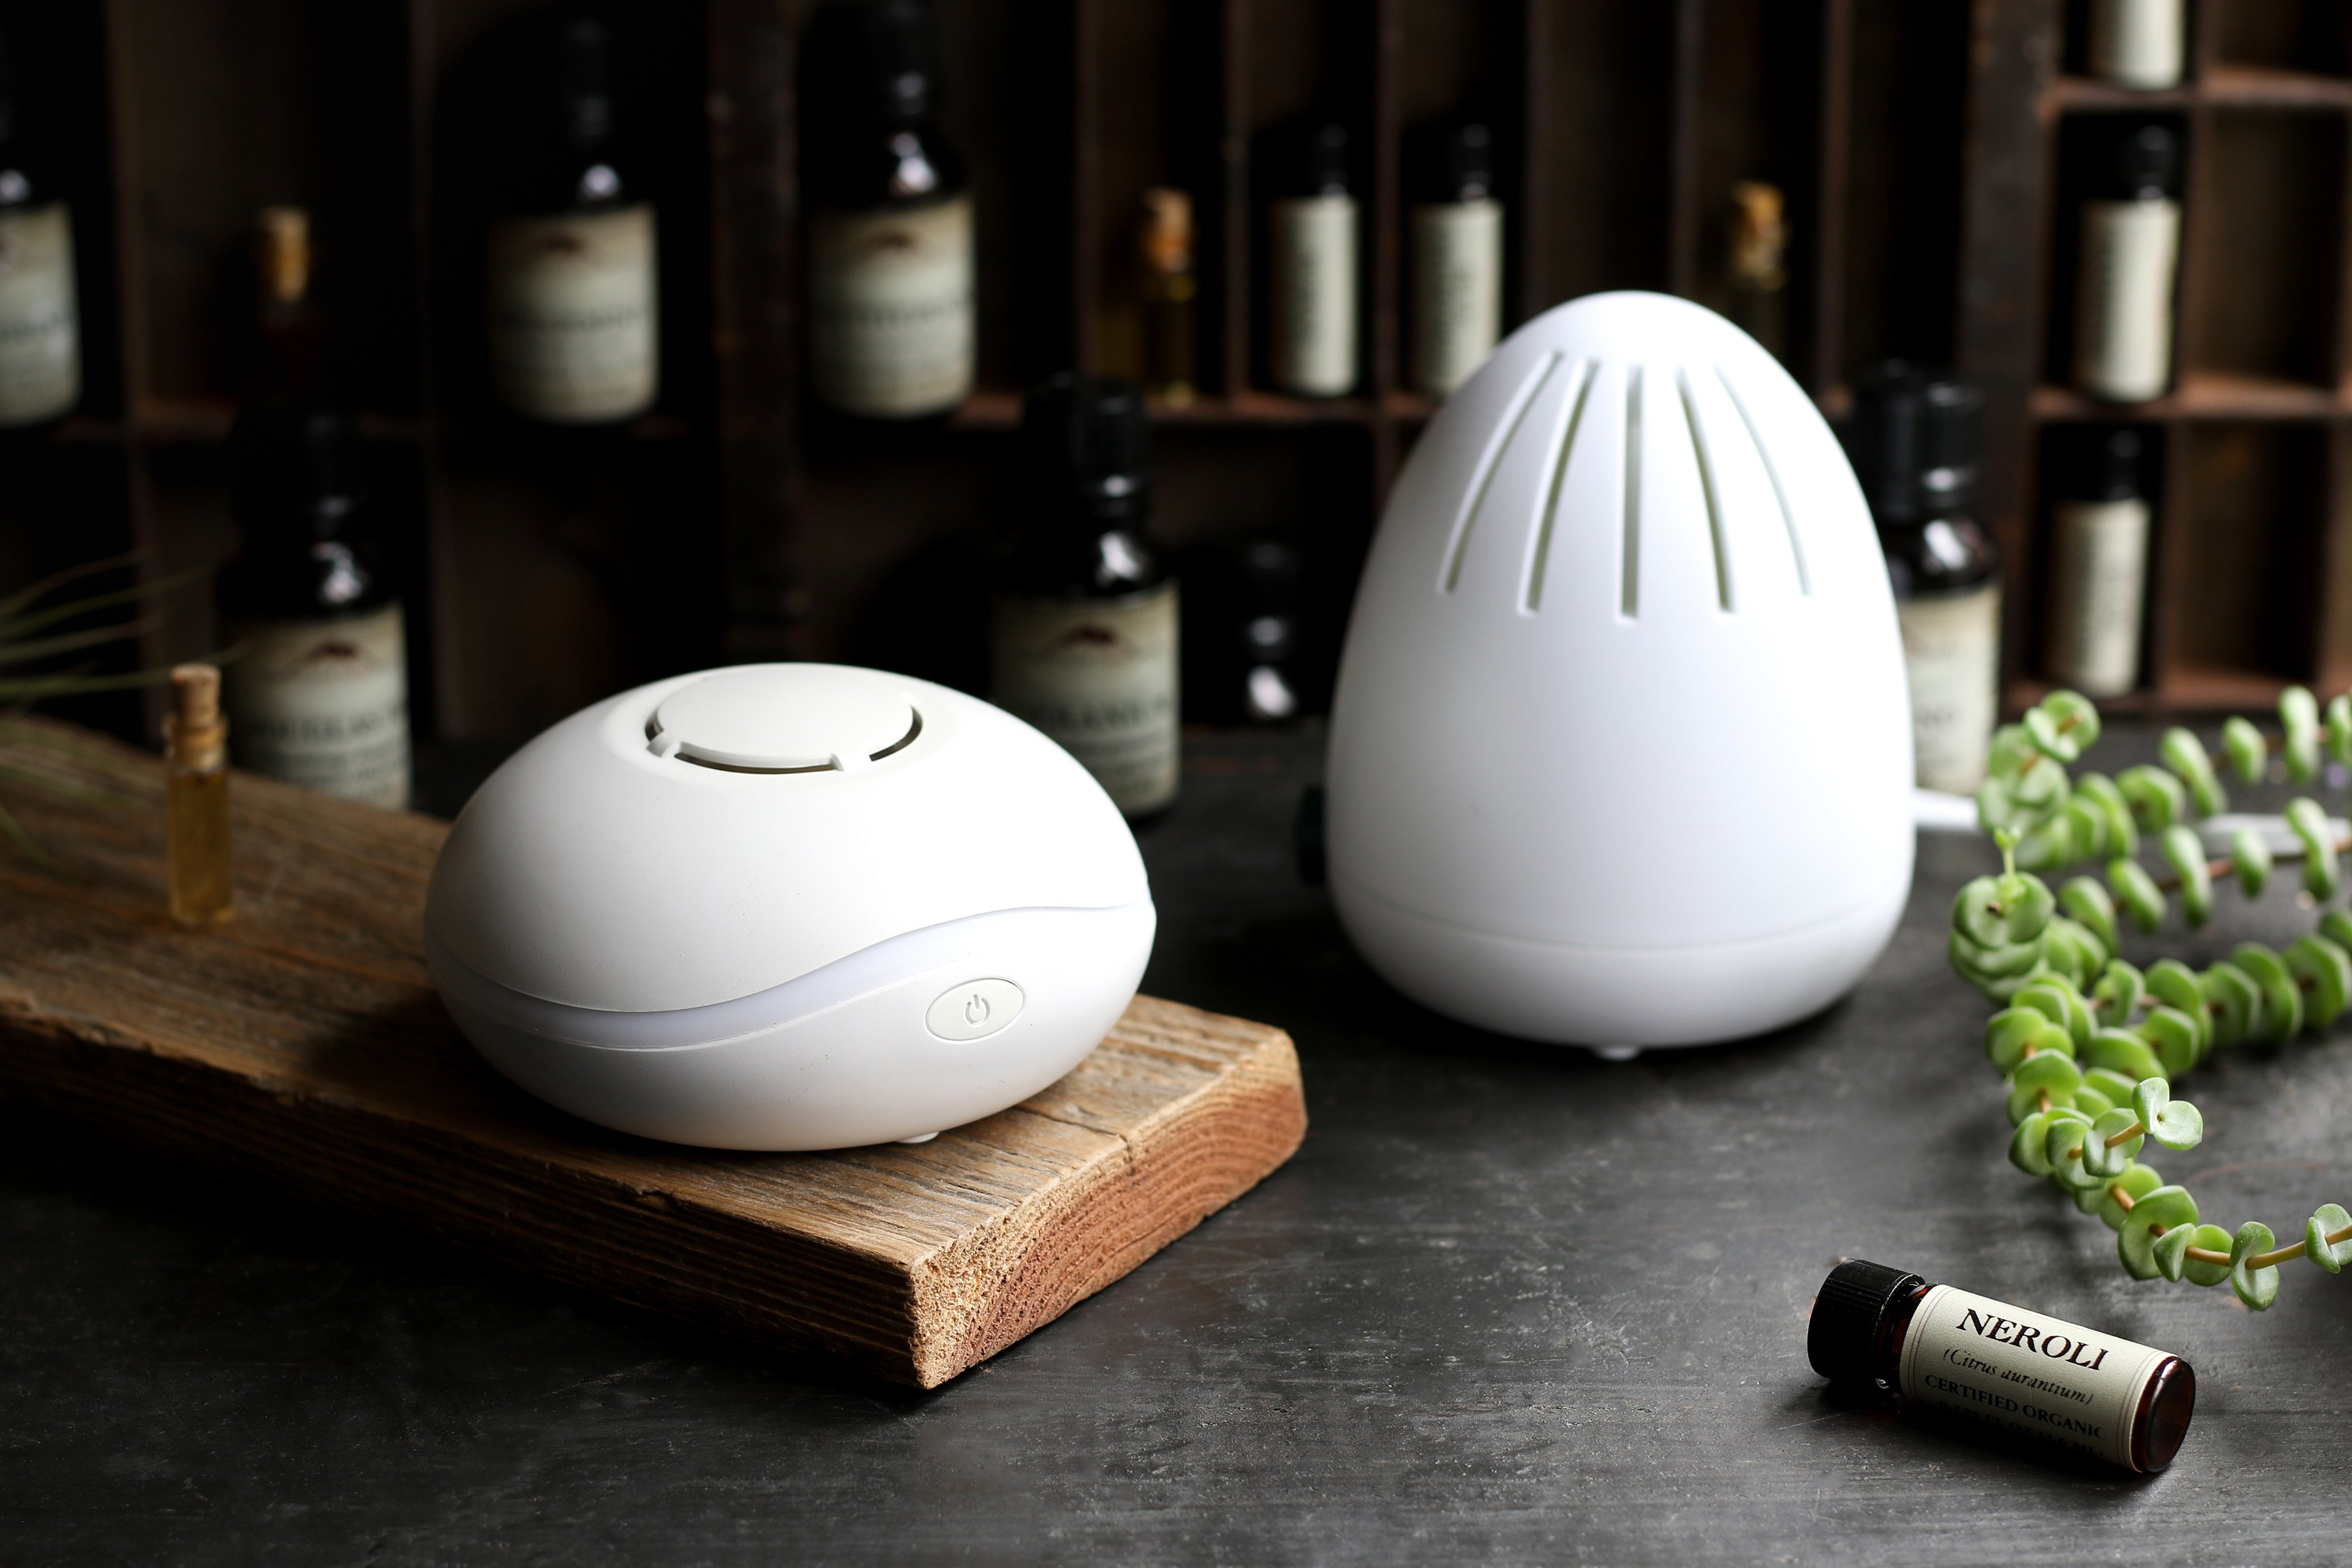 The 21 Best Essential Oil Diffusers to Buy in 2020 - Allure